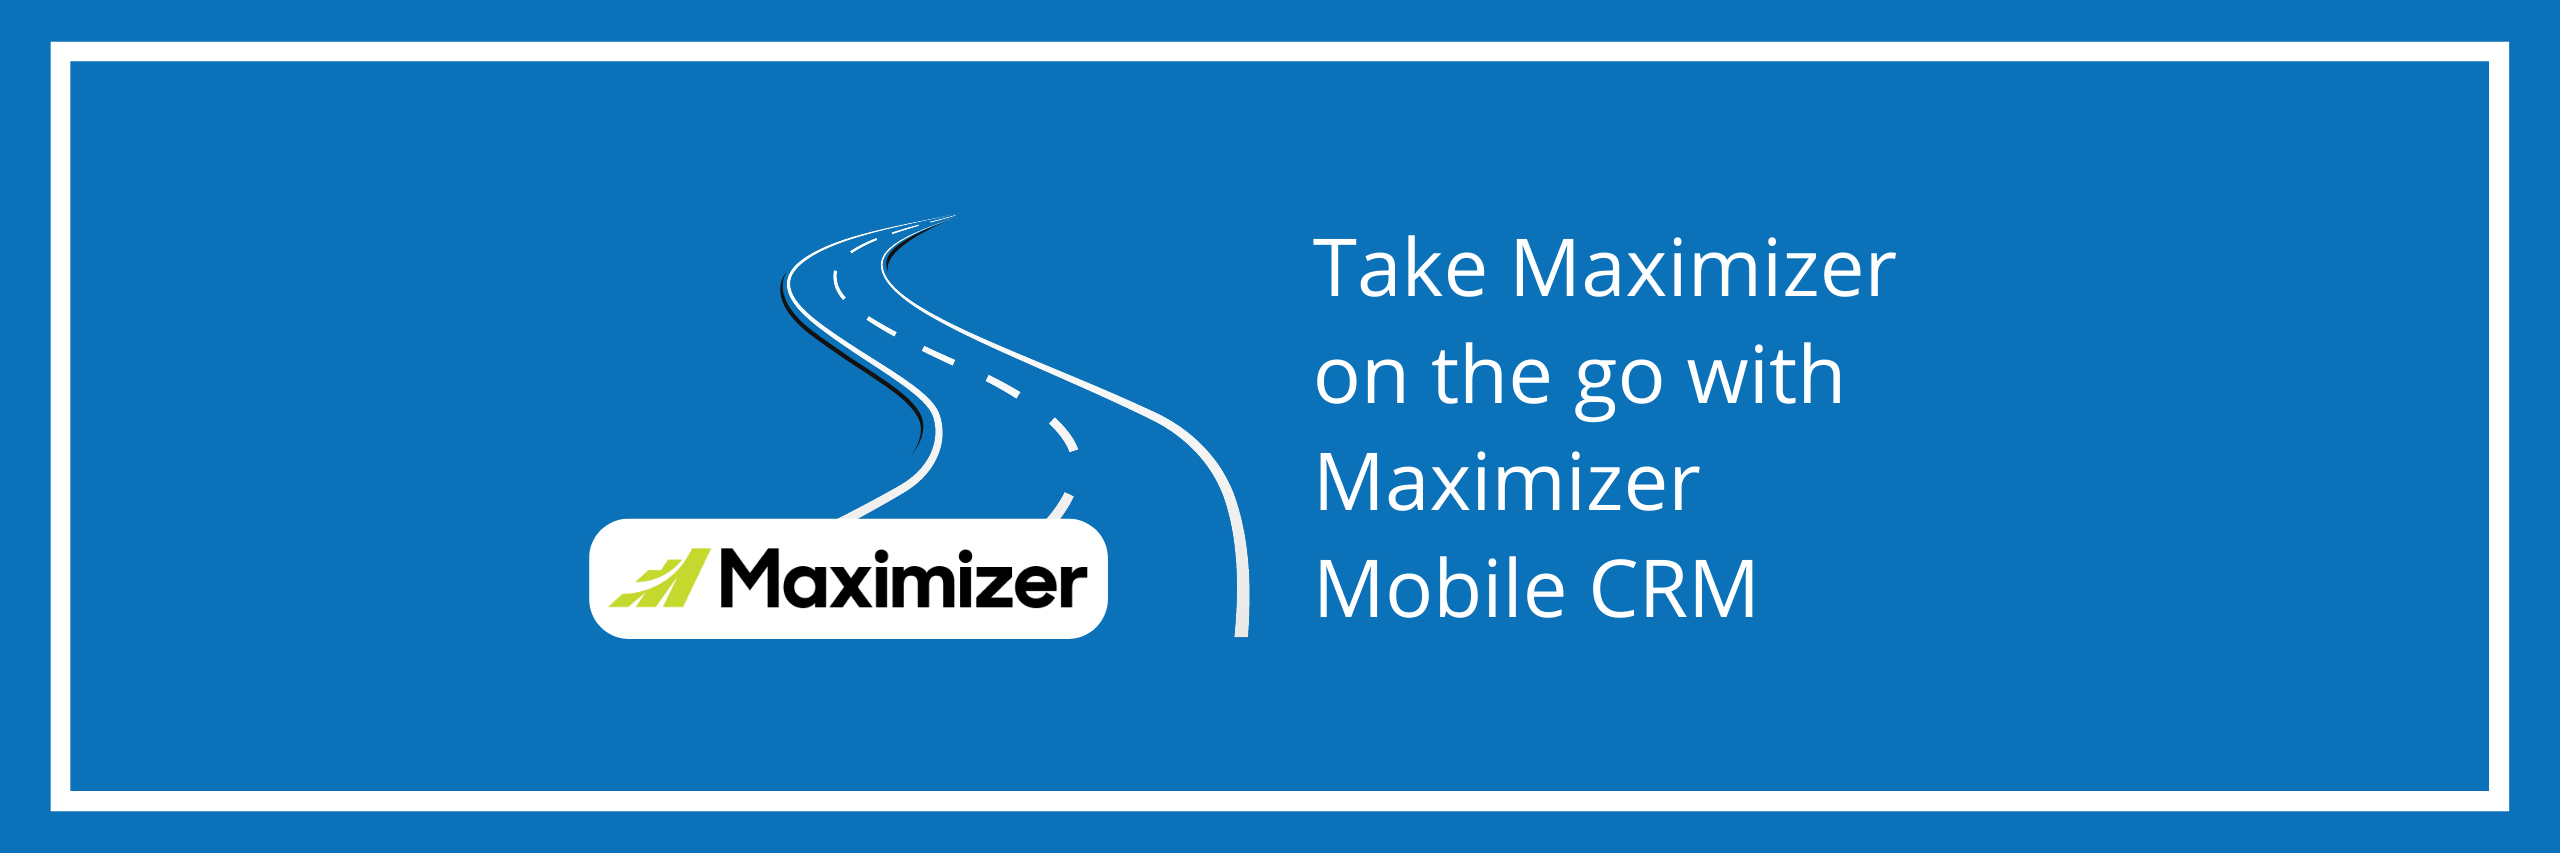 Take Maximizer on the go with Maximizer Mobile CRM